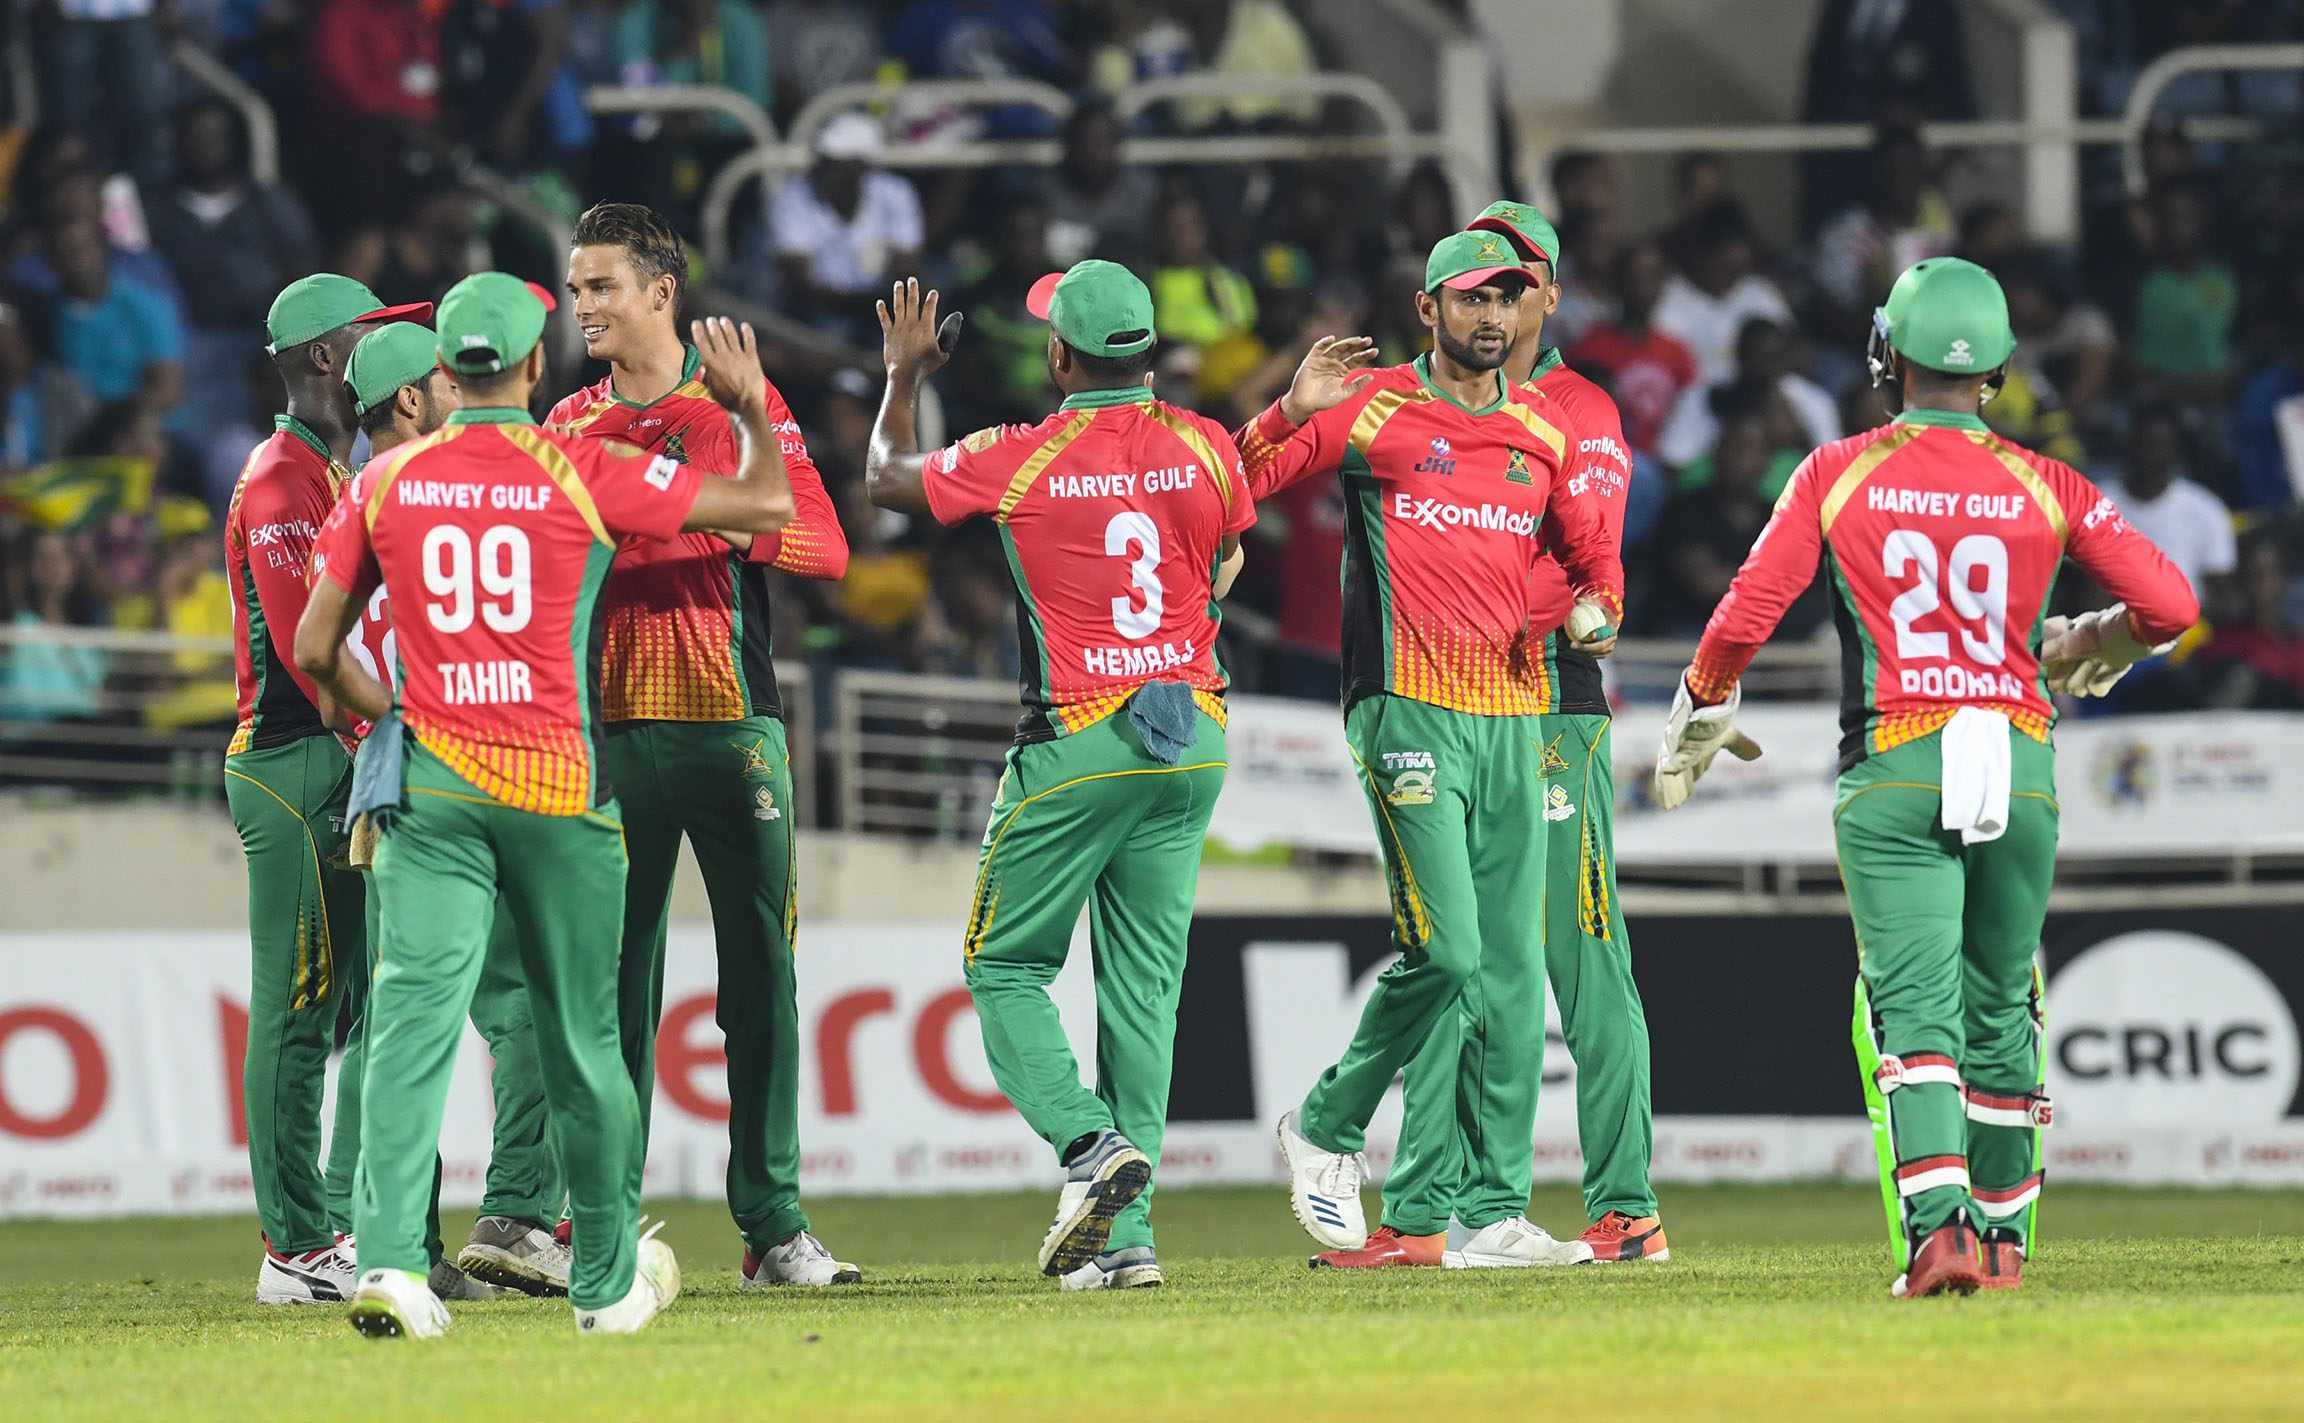 Match Tie, Guyana Amazon Warriors Win Super Over In Exciting CPL Match Against Trinbago Knight Riders.